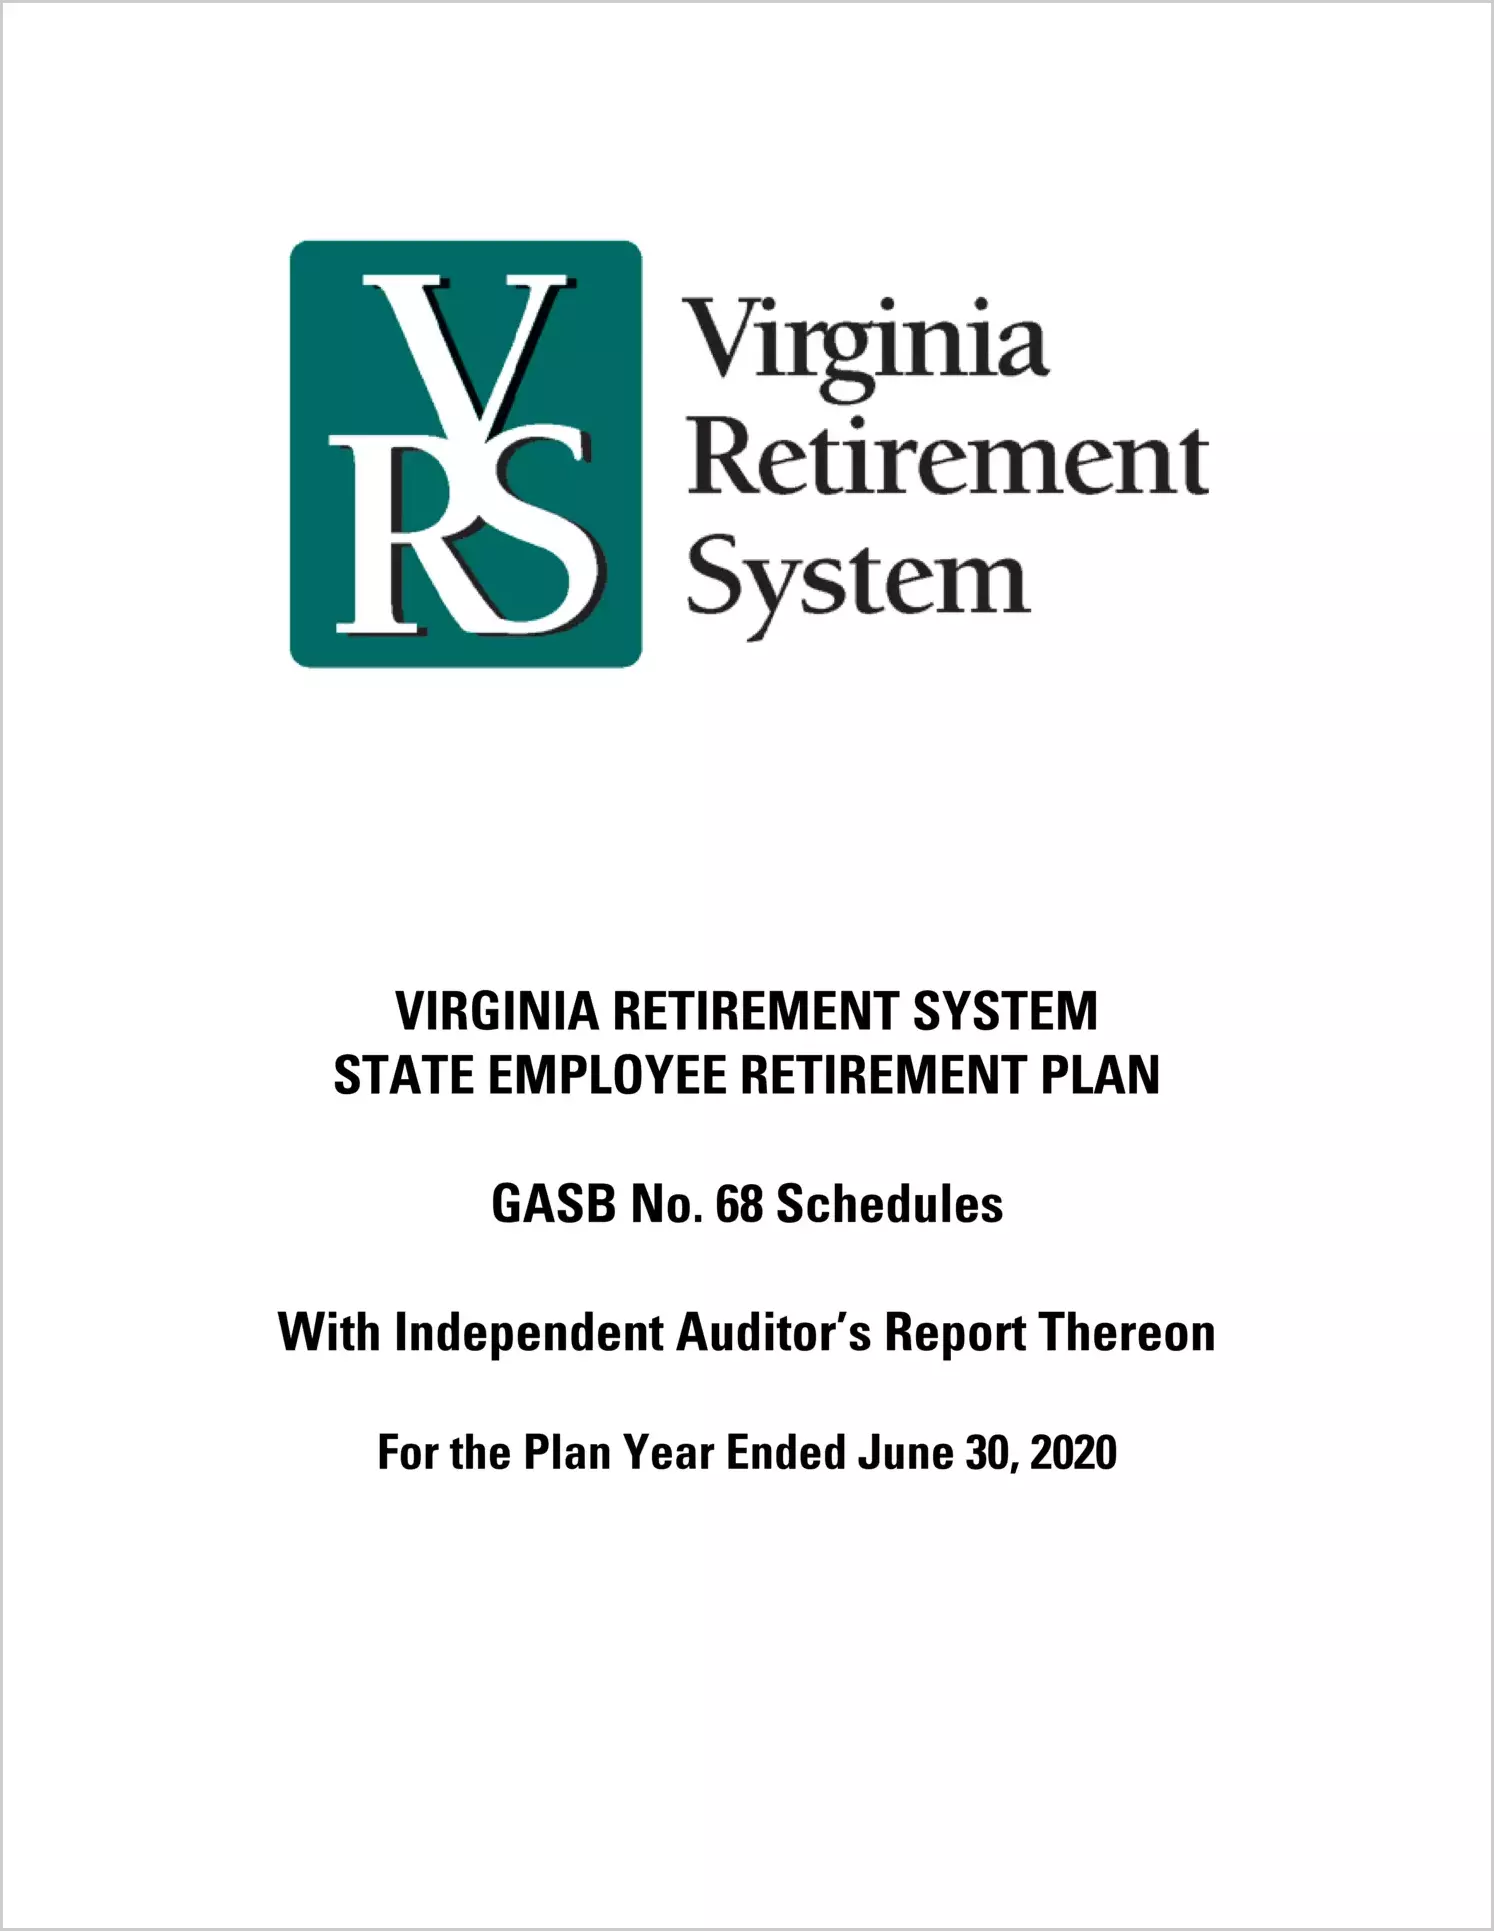 GASB 68 Schedule - Virginia Retirement System State Employee Retirement Plan for the year ended June 30, 2020